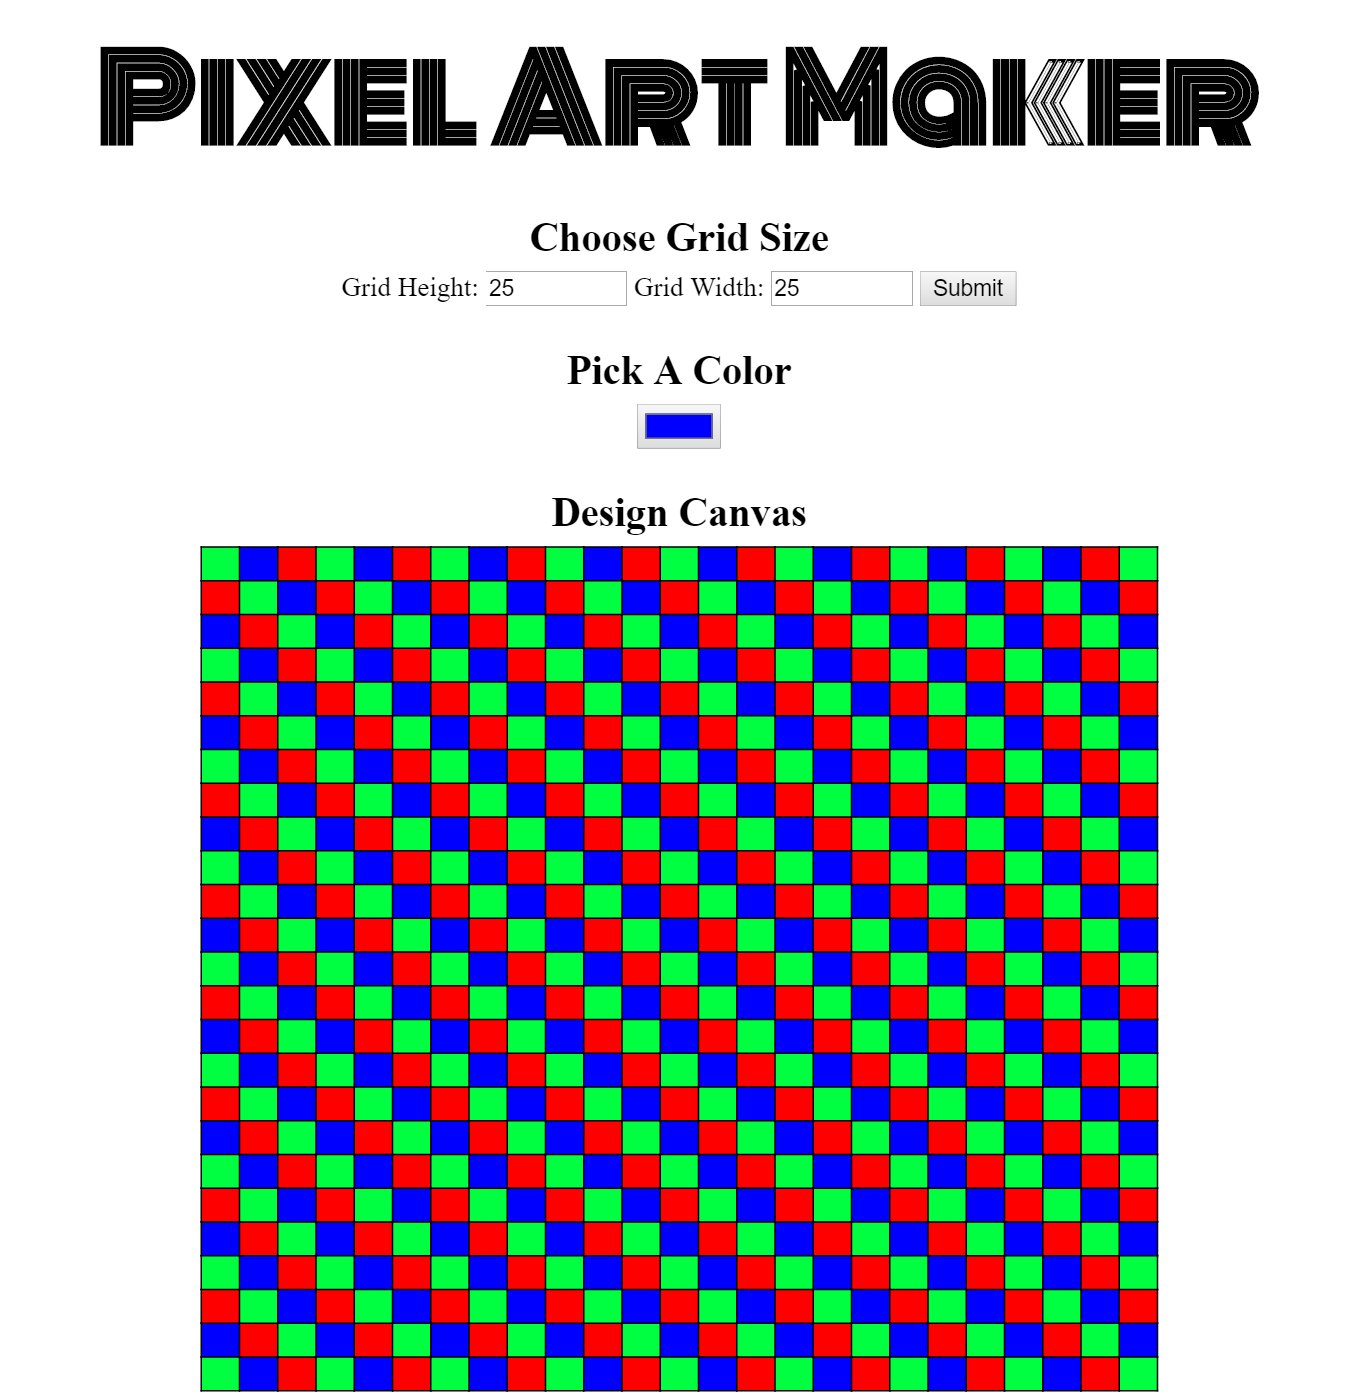 Pixel art maker display while selecting a canvas color